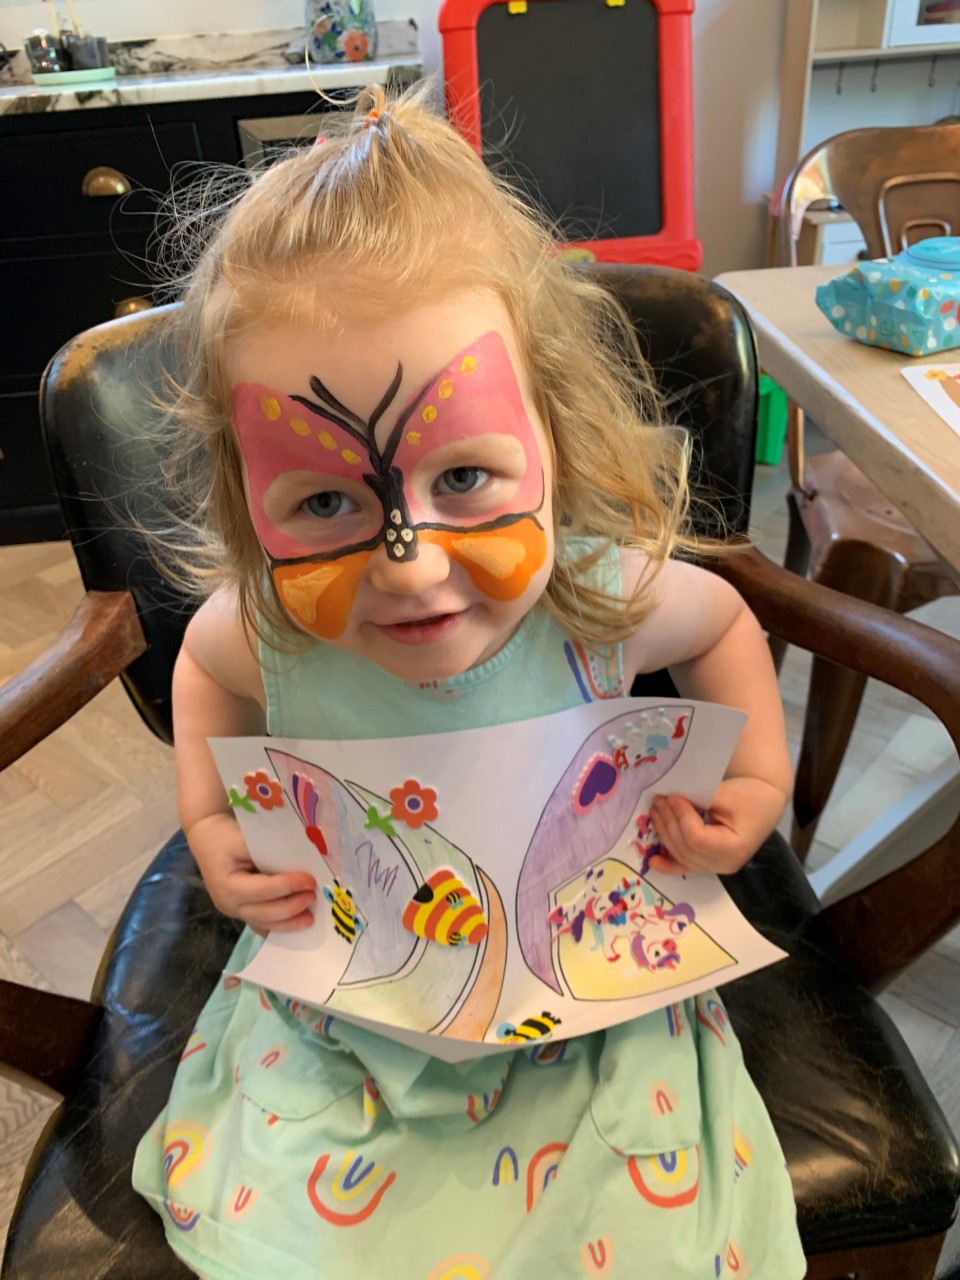 A small girl wearing butterfly face paint and holding a drawing of a butterfly